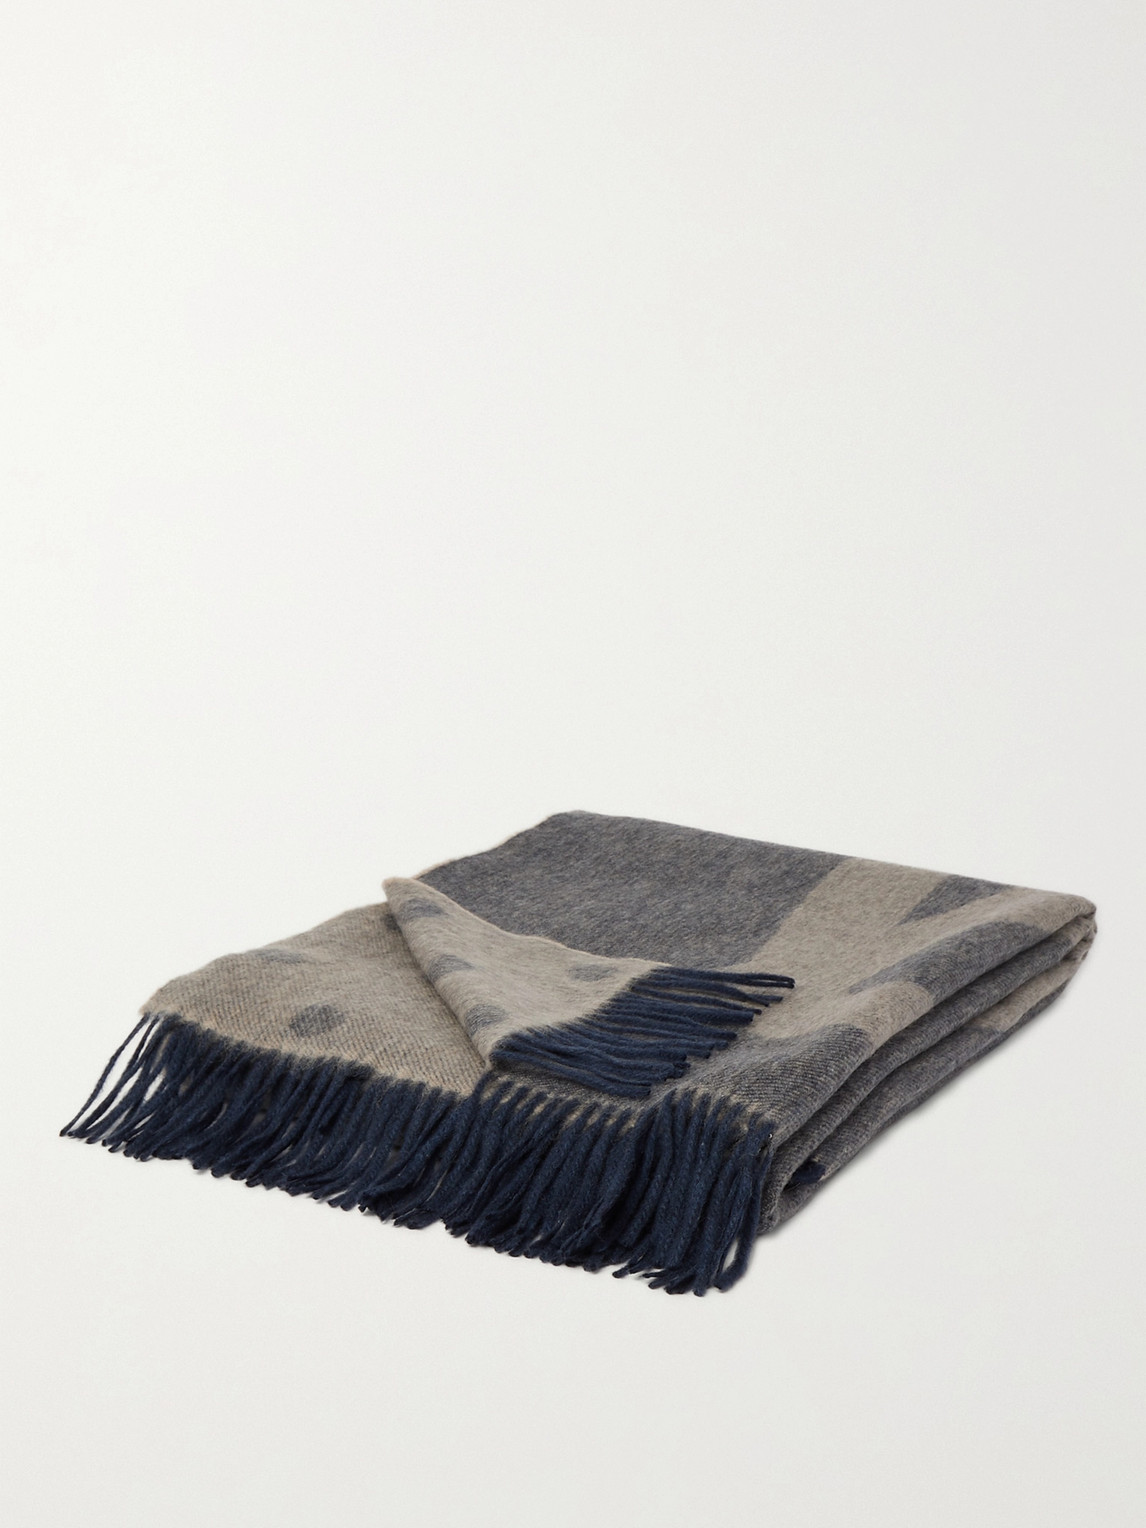 Paul Smith Fringed Wool And Cashmere-blend Jacquard Blanket In Blue